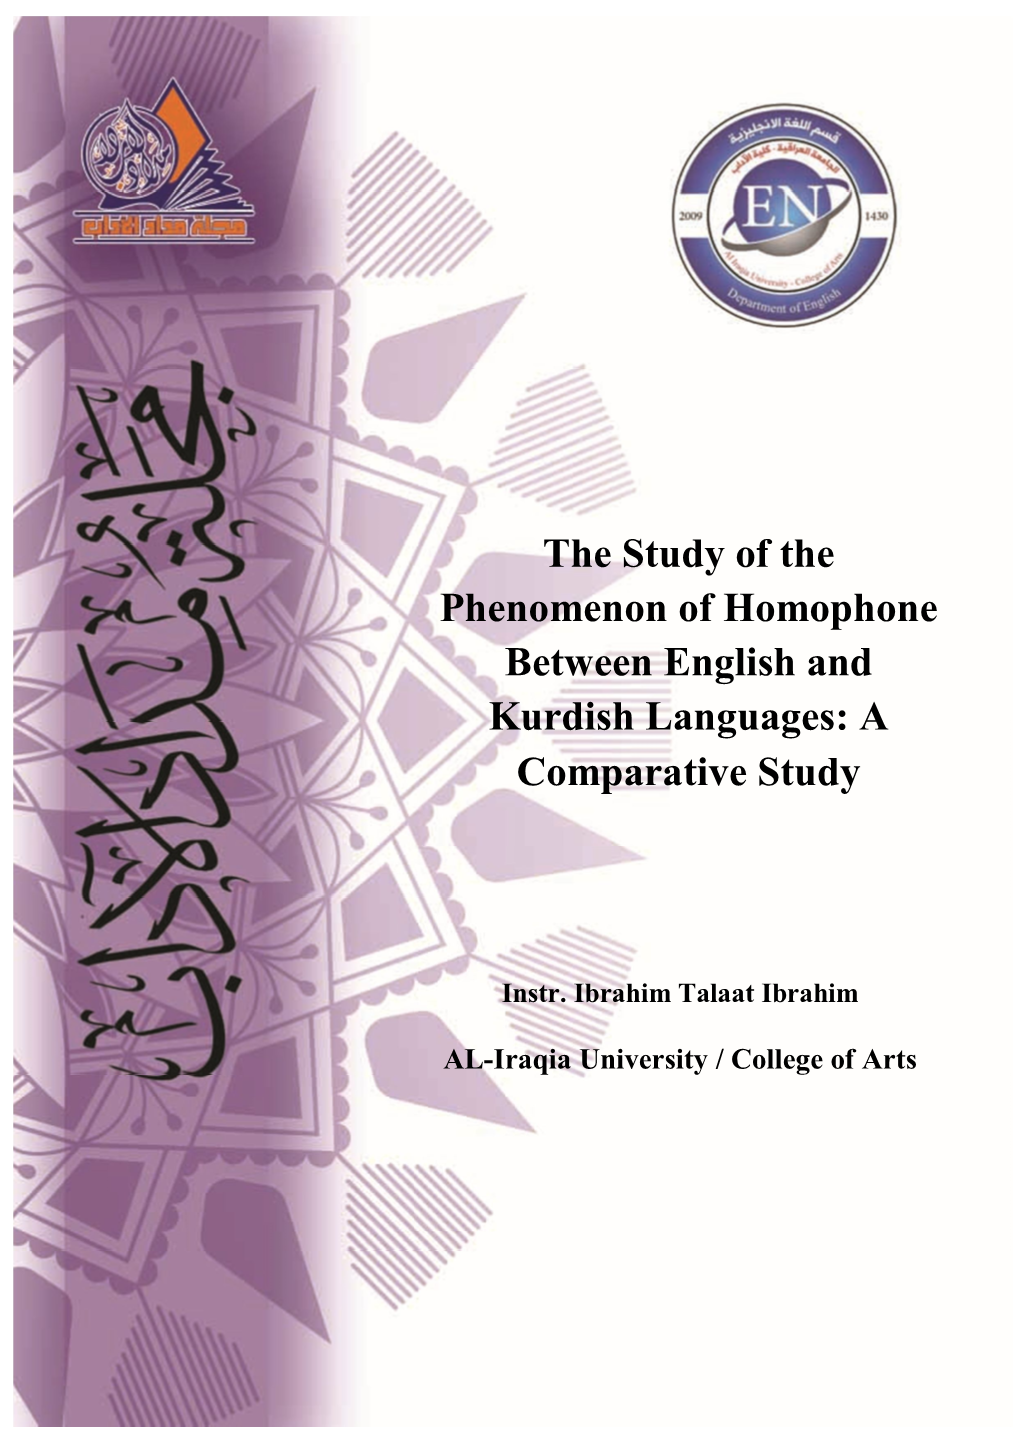 The Study of the Phenomenon of Homophone Between English and Kurdish Languages: a Comparative Study